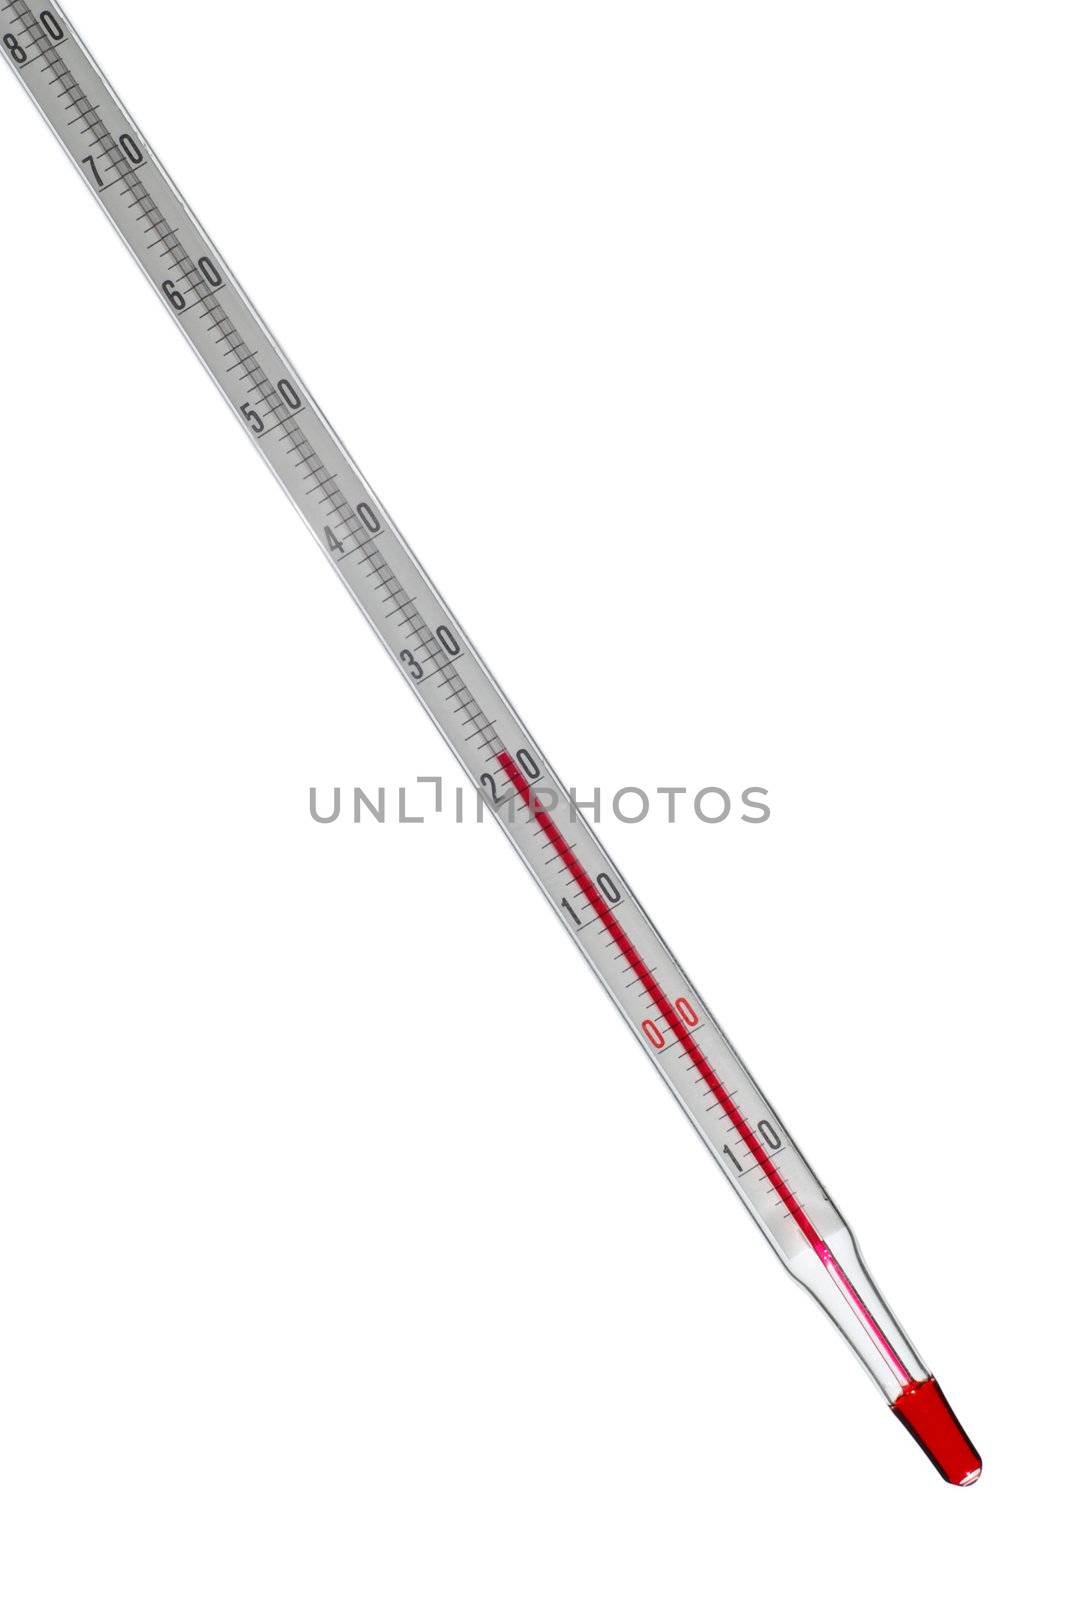 Sientific thermometer isolated on white background